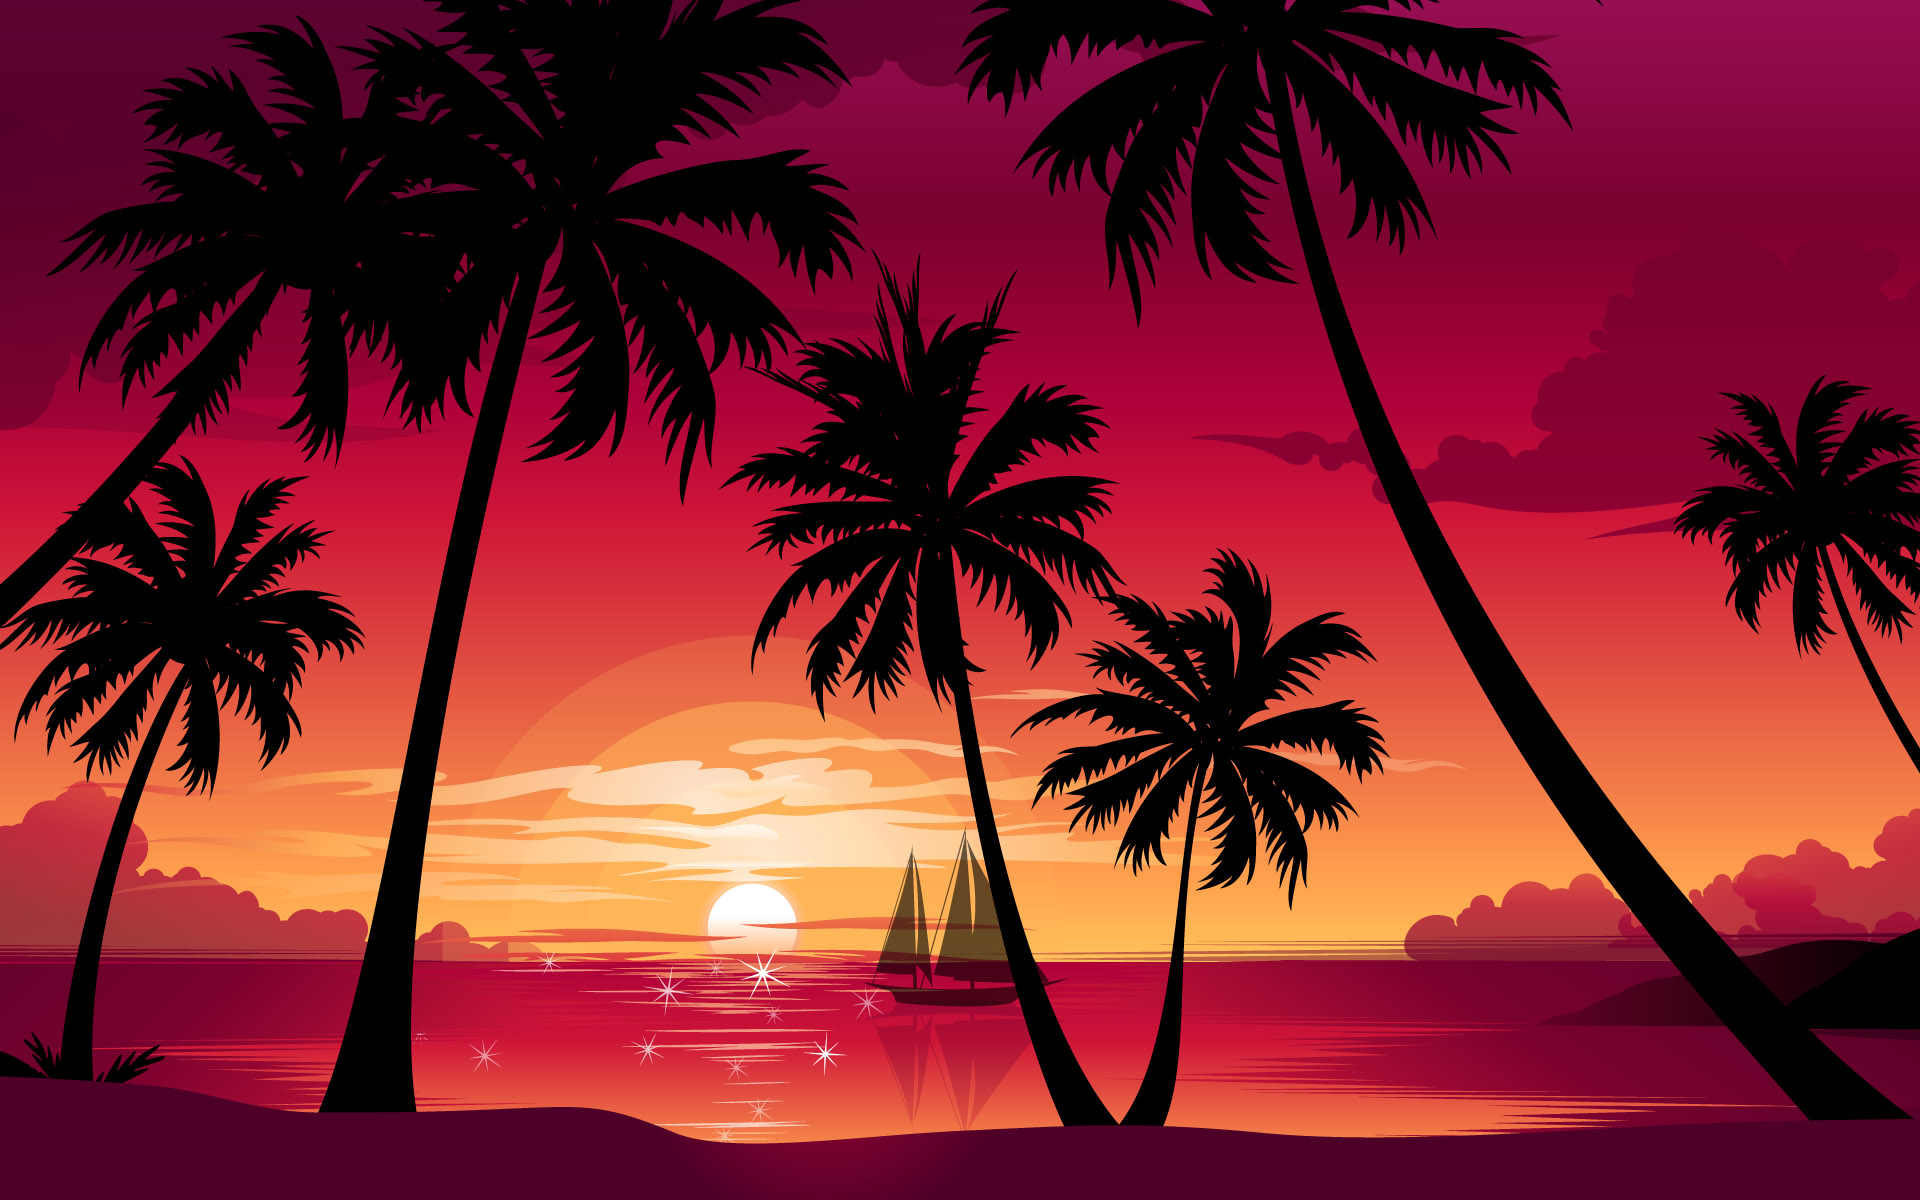  wallpapers palm trees sunset wallpapers palm trees sunset wallpapers